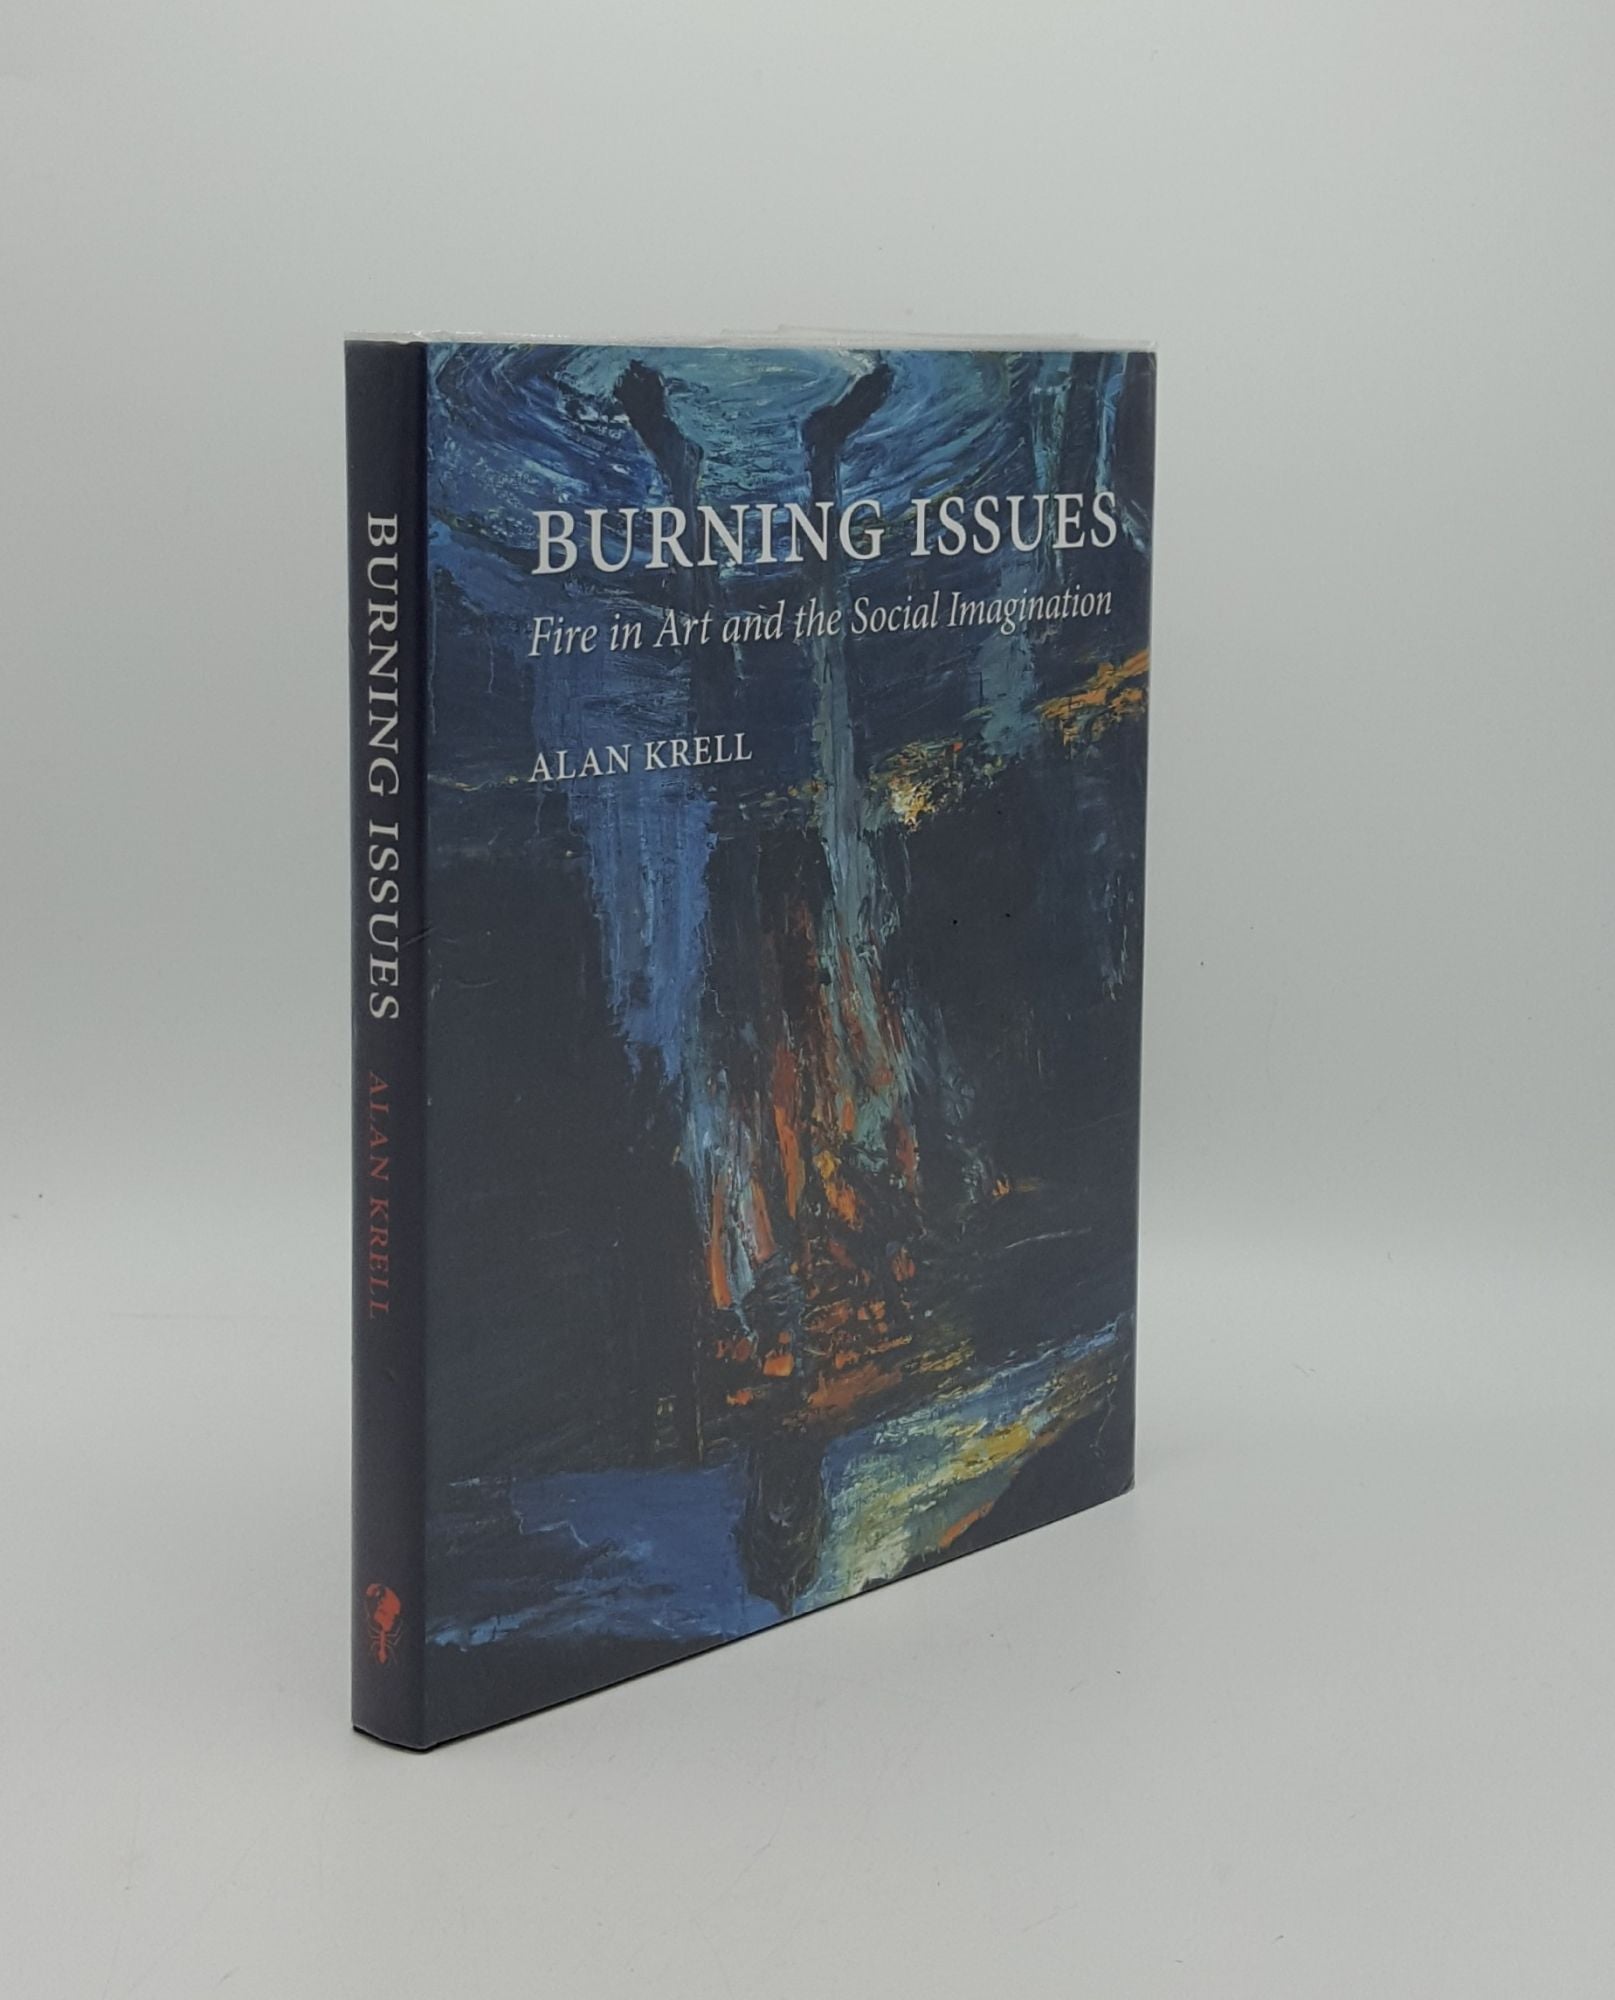 KRELL Alan - Burning Issues Fire in Art and the Social Imagination